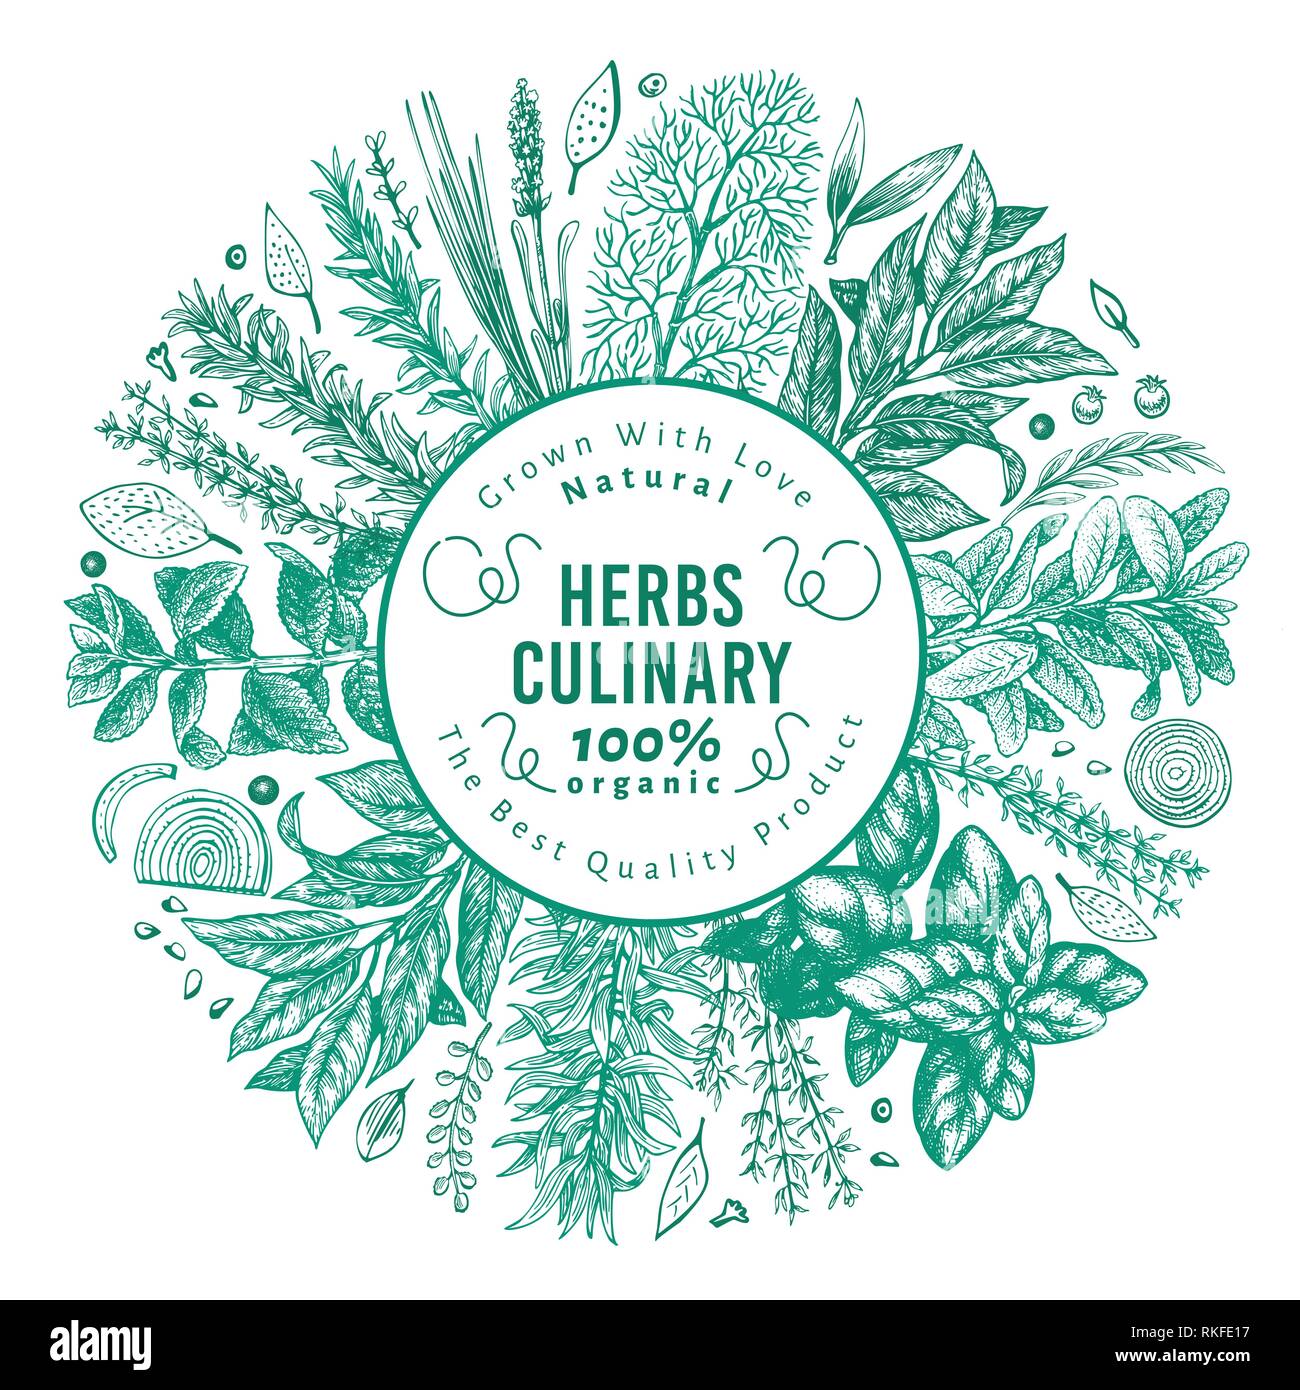 Culinary herbs and spices banner template. Vector background for design menu, packaging, recipes, label, farm market products. Hand drawn vintage botanical illustration. Stock Vector